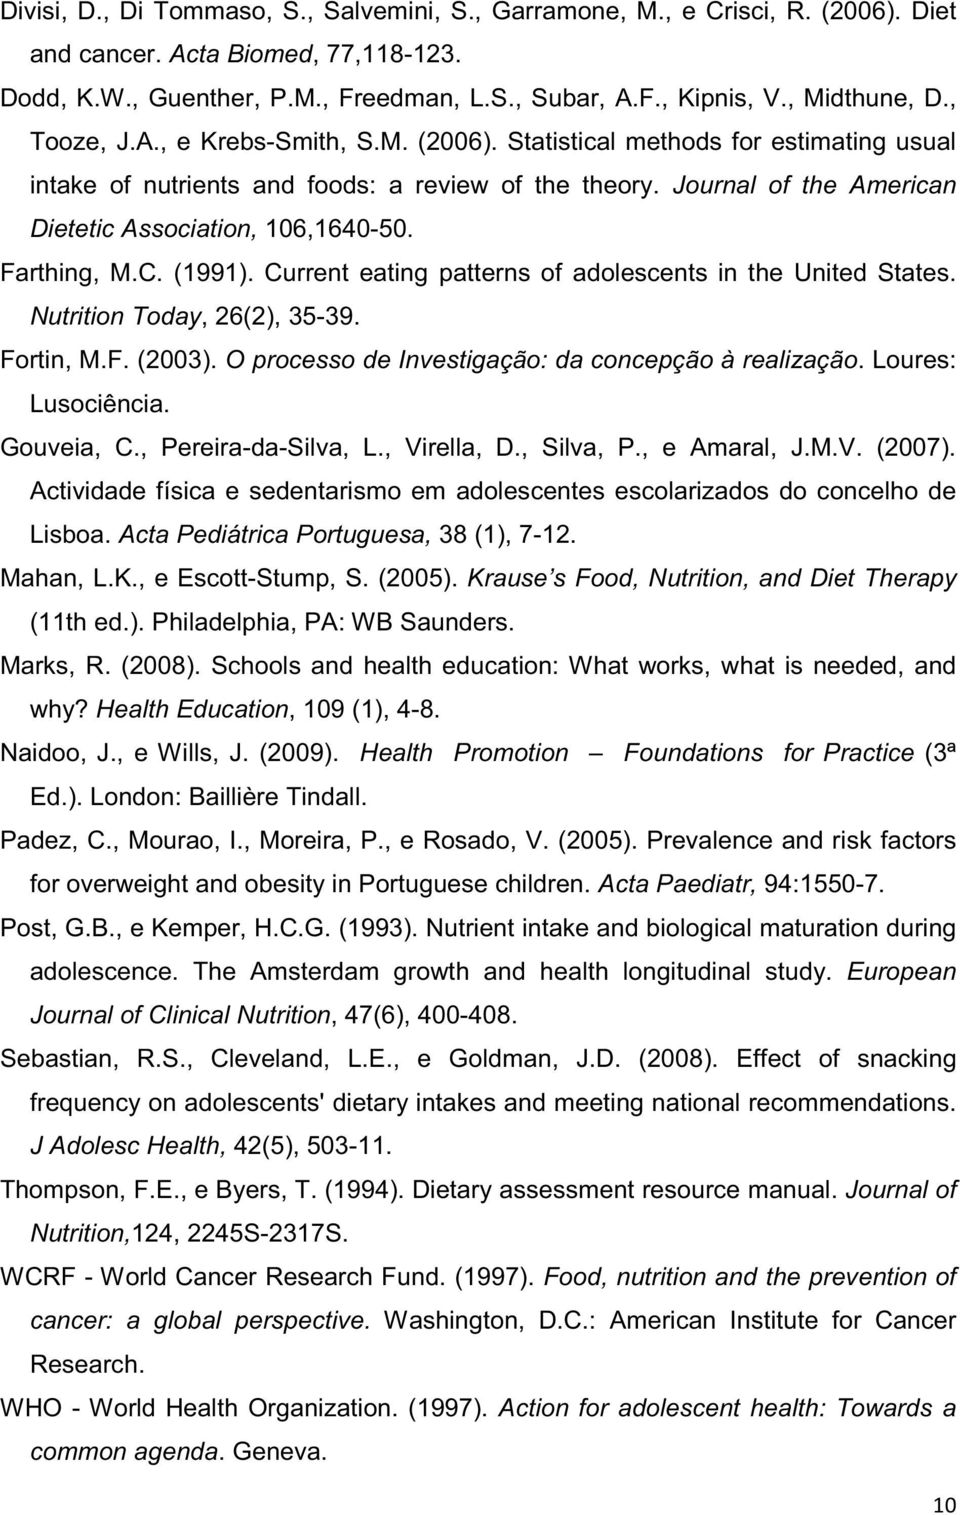 Journal of the American Dietetic Association, 106,1640-50. Farthing, M.C. (1991). Current eating patterns of adolescents in the United States. Nutrition Today, 26(2), 35-39. Fortin, M.F. (2003).